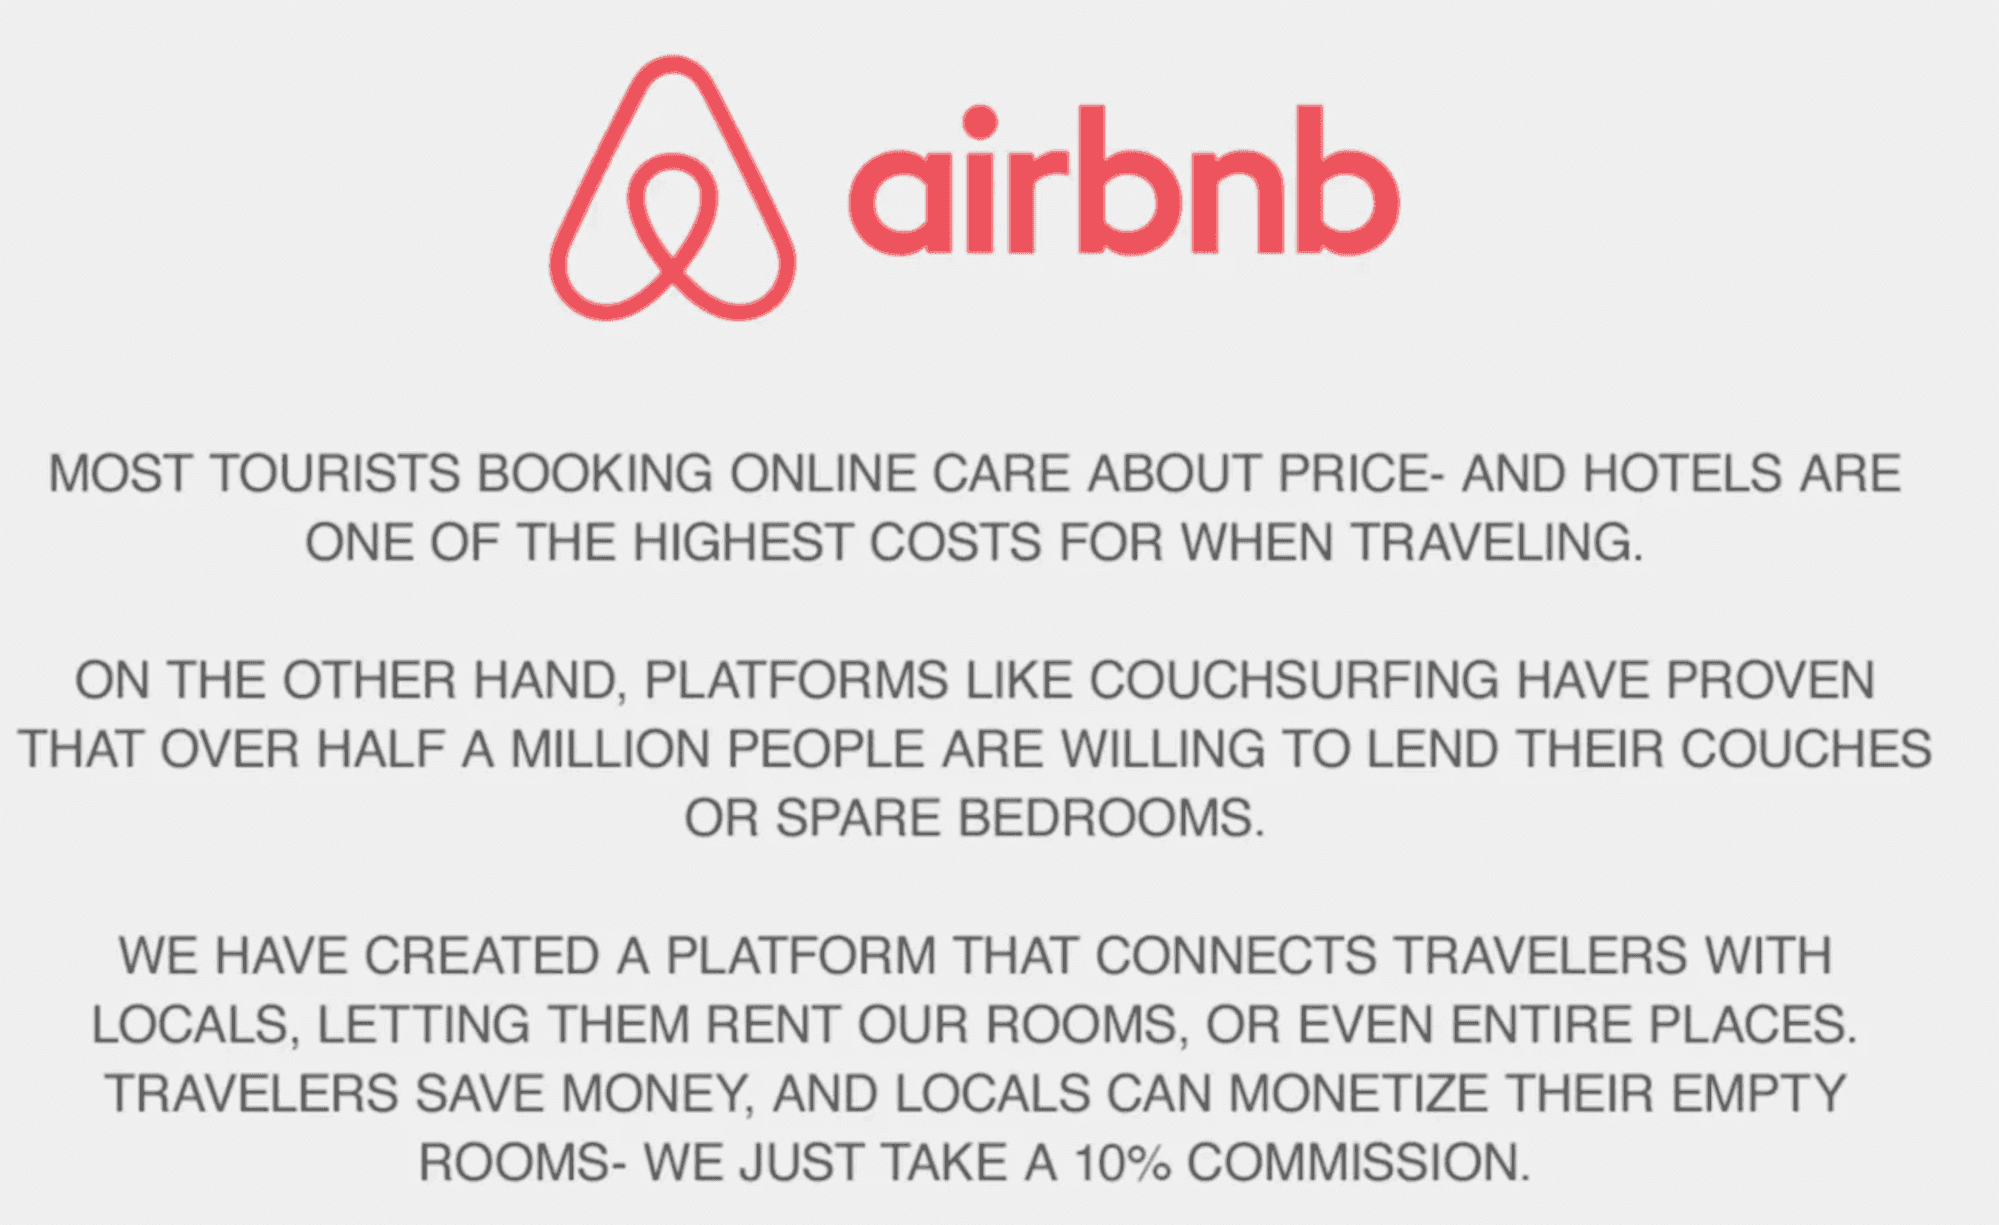 message from airbnb saying: Most tourists booking online care about price and hotels are one of the highest costs for when traveling. On the other hand, platforms like couchsurfing have proven that over half a million people are willing to lend their couches or spare bedrooms. We have created a platform that connects travelers with locals, letting them rent our rooms, or even entire places. Travelers save money, and locals can monetize their empty rooms - we just take a 10% commission.